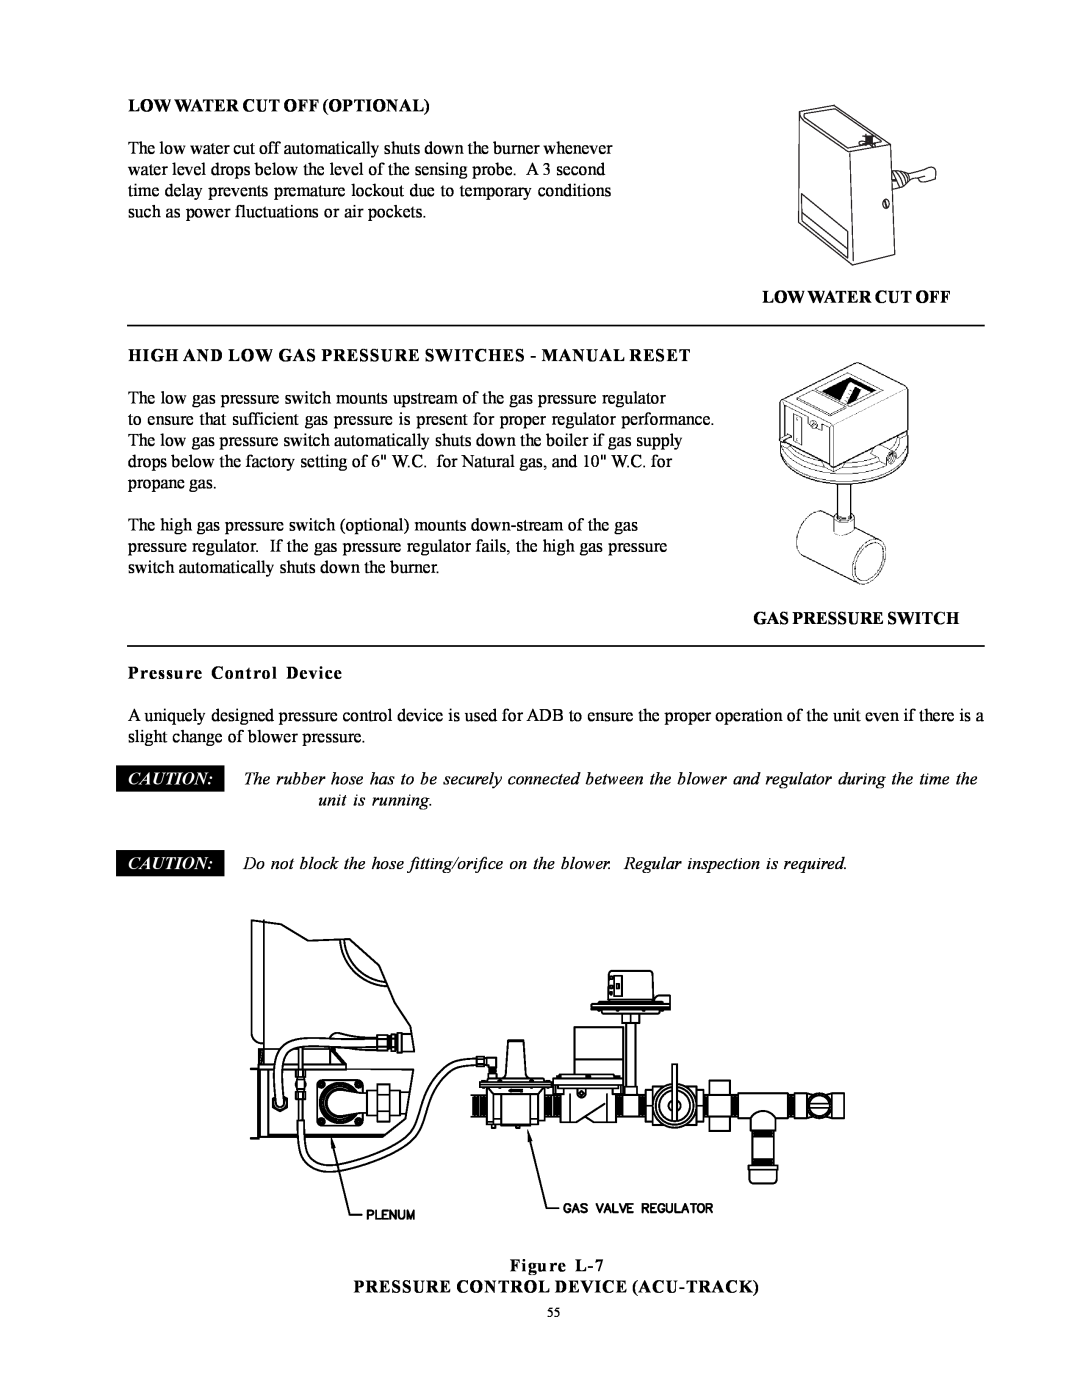 Raypak 750, 500, 1000 installation instructions Low Water Cut Off Optional 